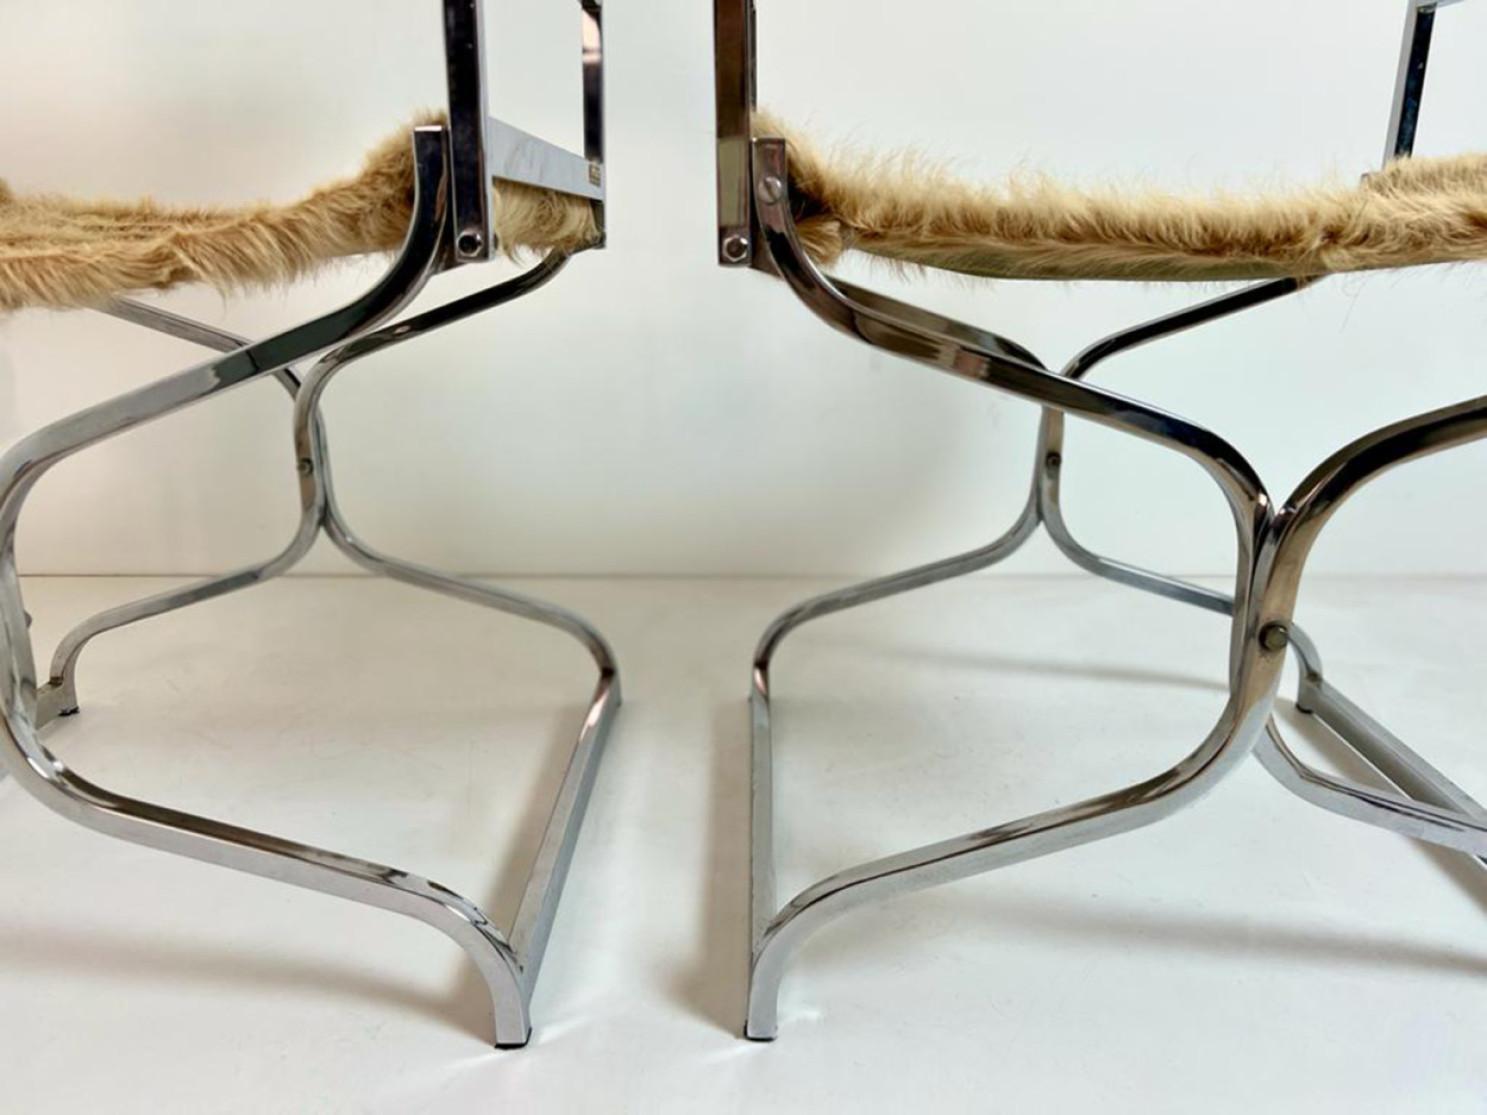 Set of Two Chrome Chairs With Horse Skin Upholstery by Arrmet, Italy 1